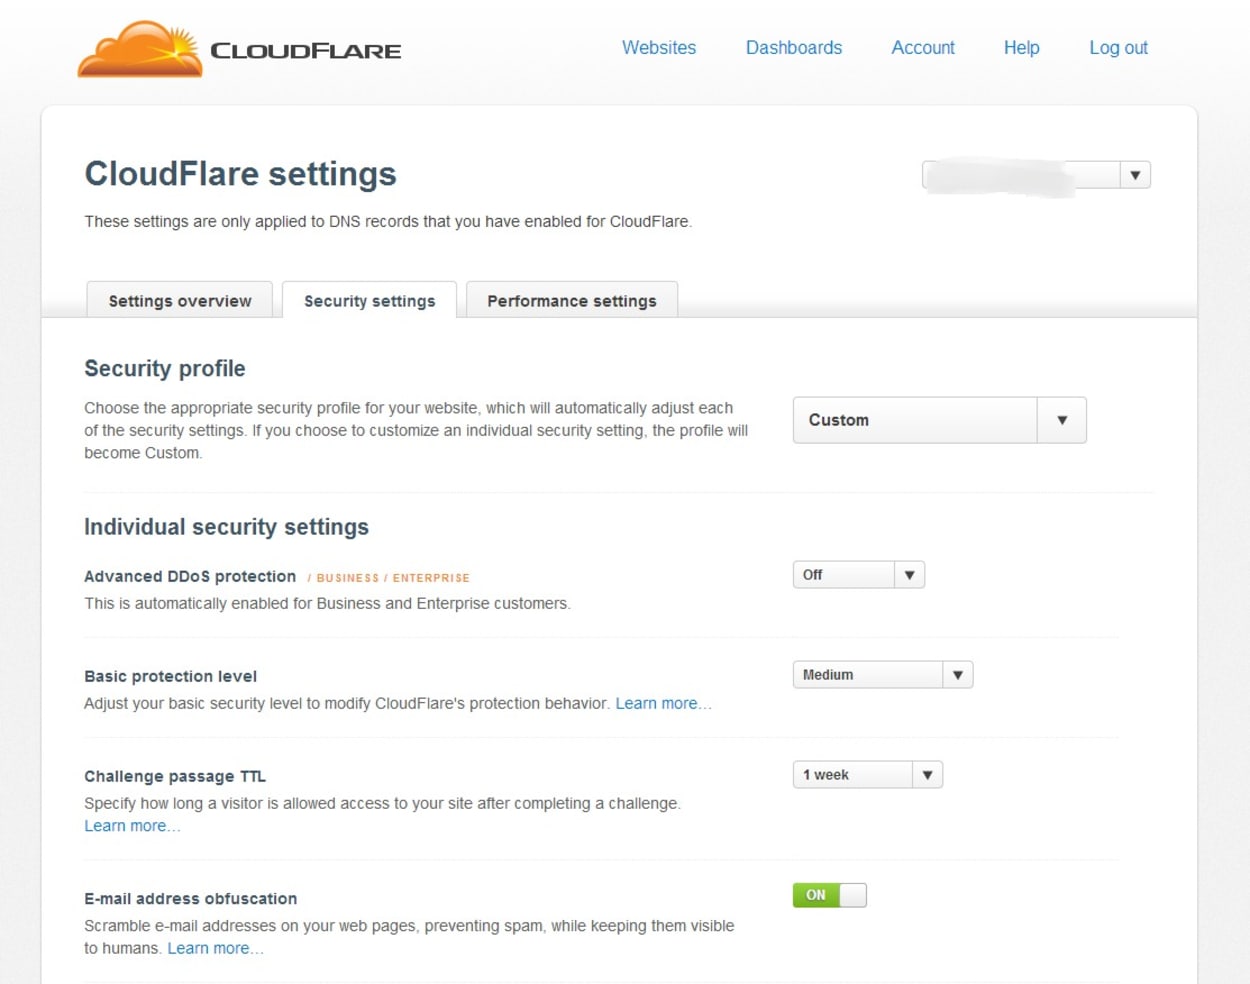 CloudFlare helps prevent spammers.